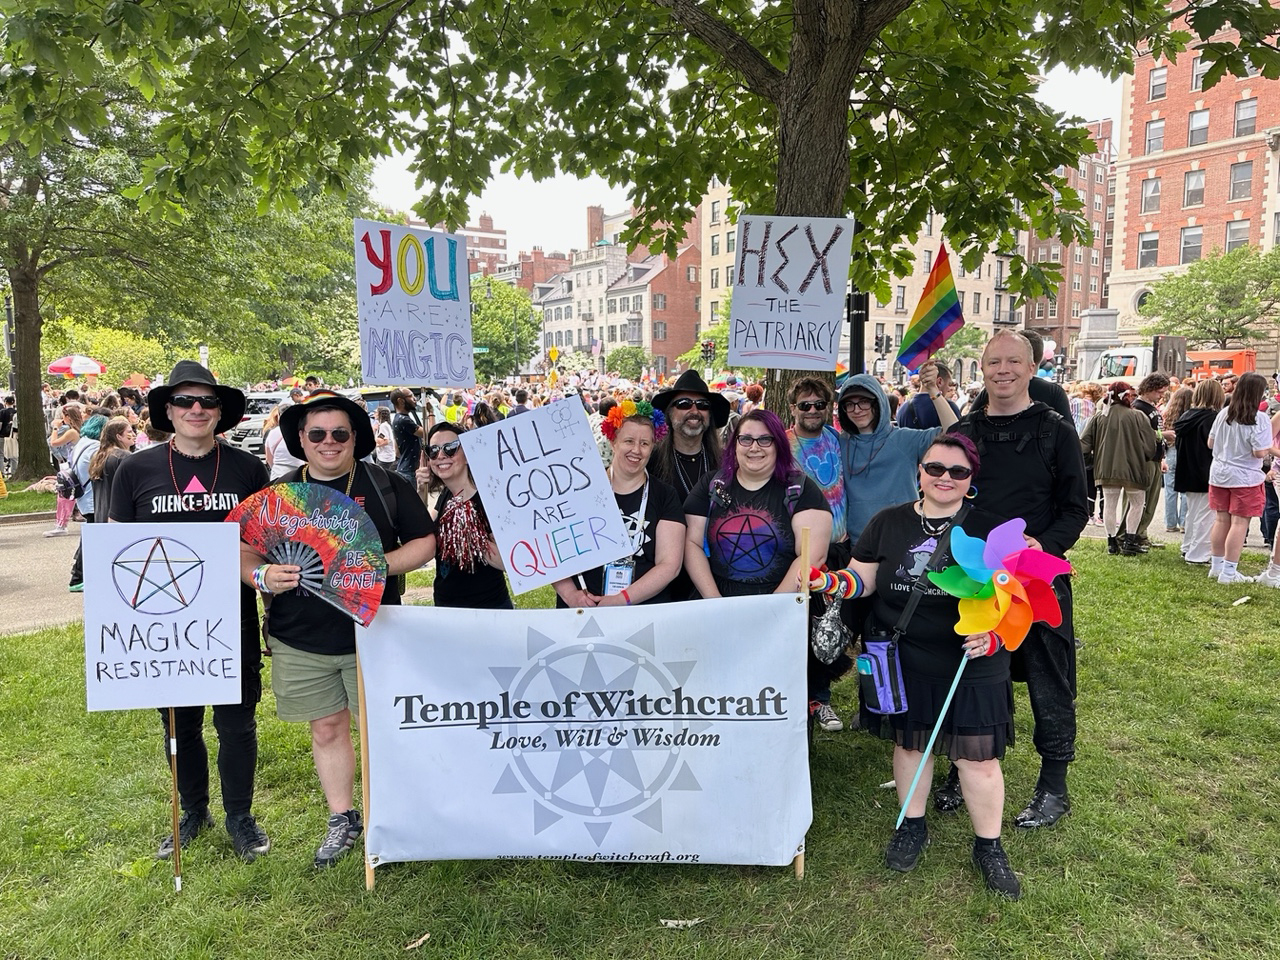 The Temple of Witchcraft marching group at Boston Pride for the People 2023. Photo courtesy Steve Kenson